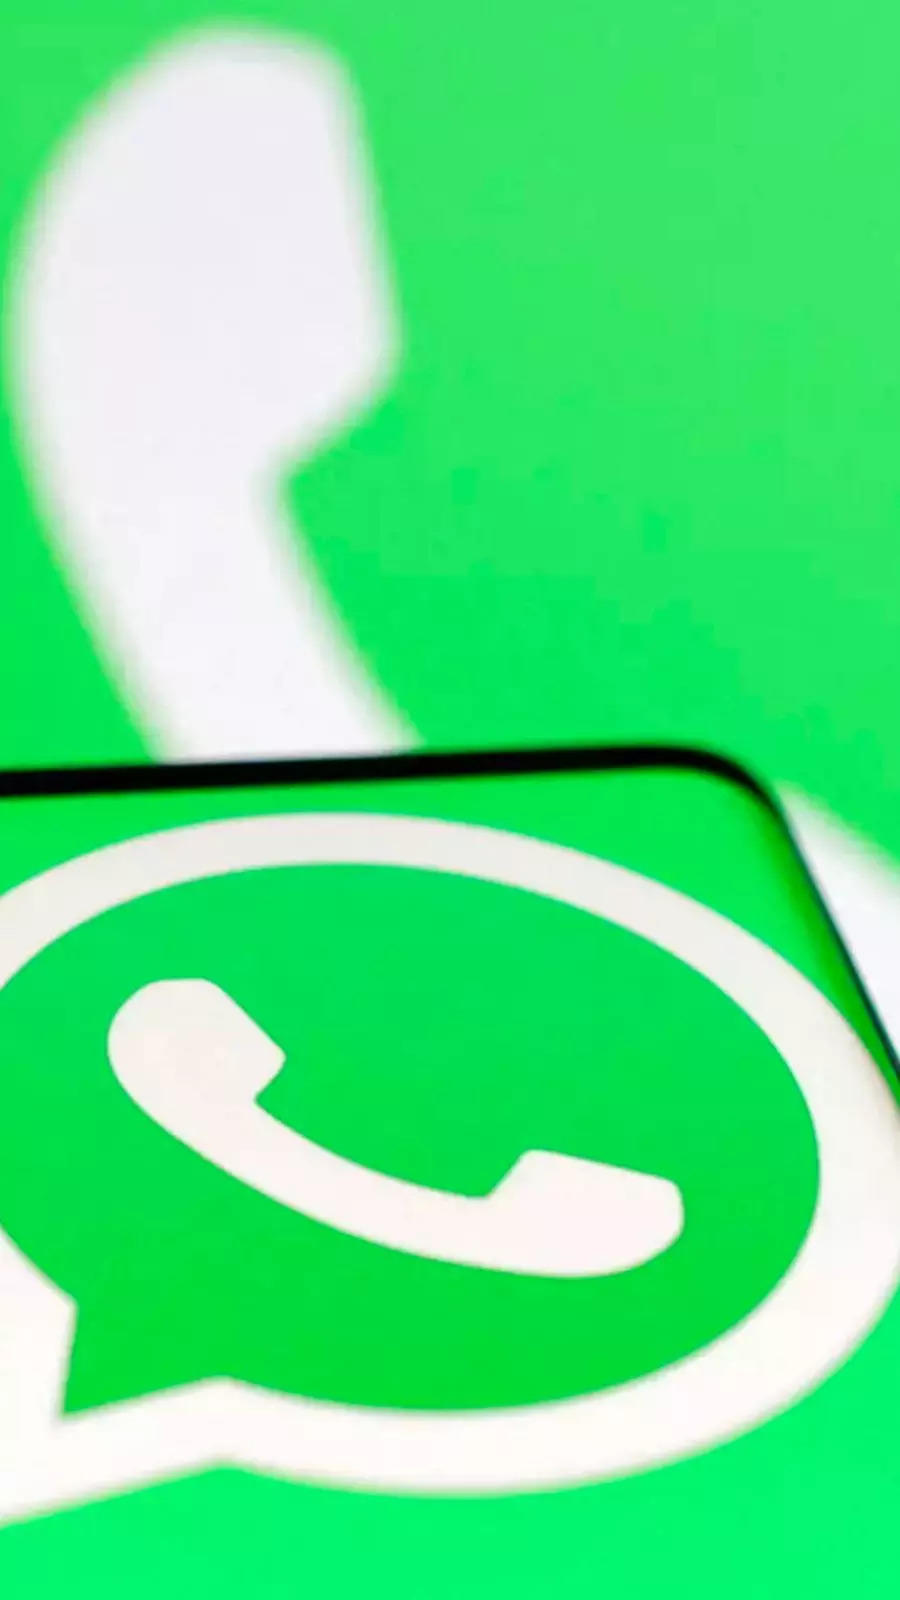 How to run WhatsApp polls? Here's a step-by-step guide | EconomicTimes